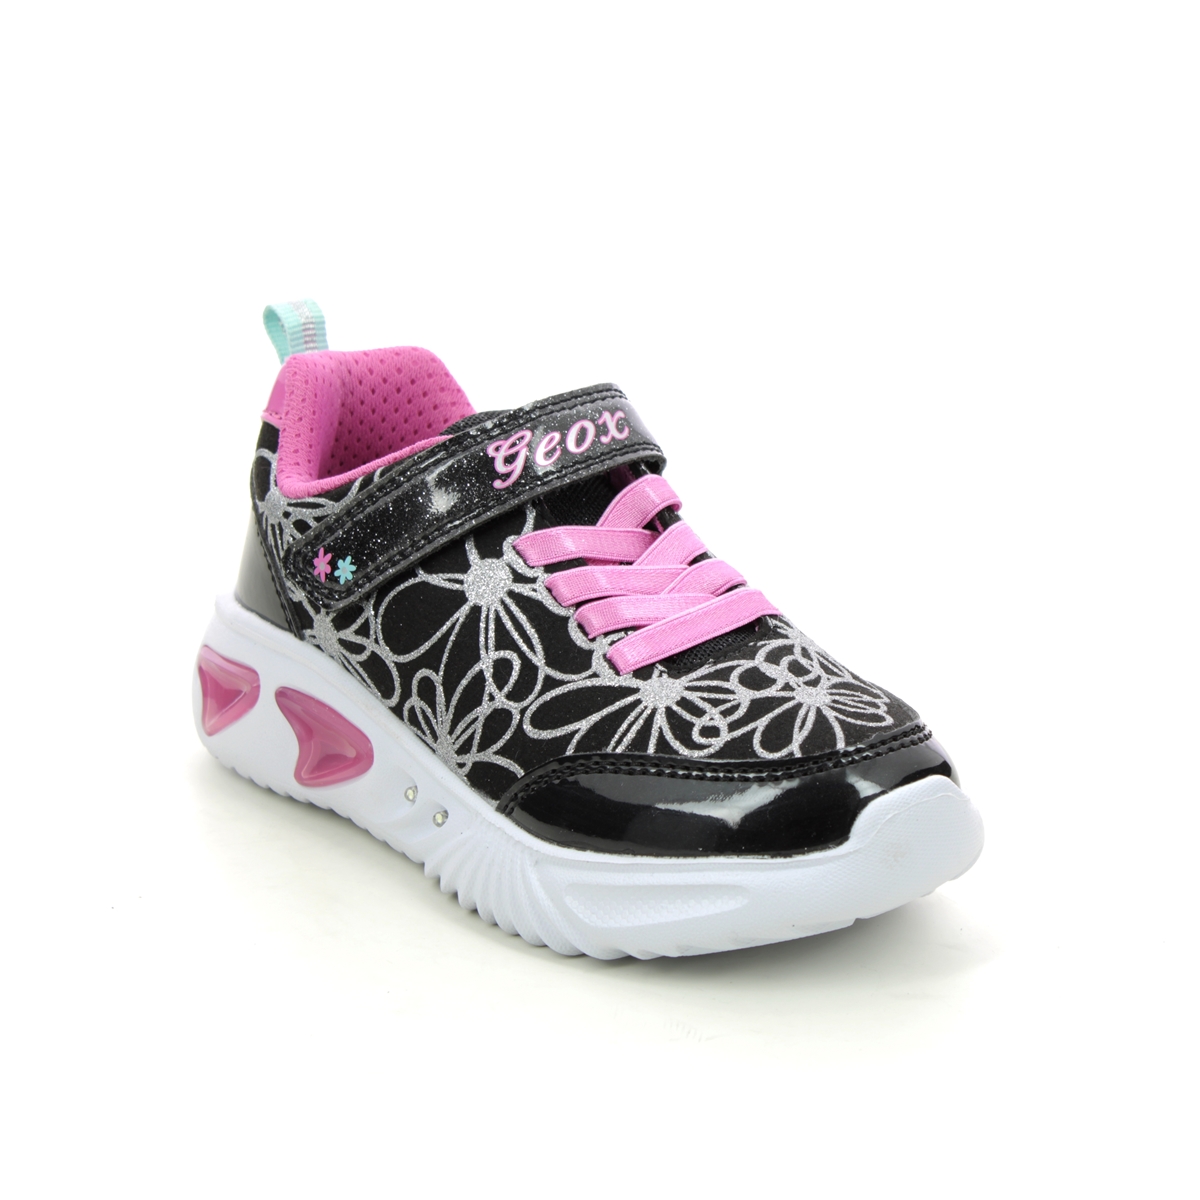 Geox - Assister Lights (Black Pink) J26E9A-C0922 In Size 33 In Plain Black Pink For kids